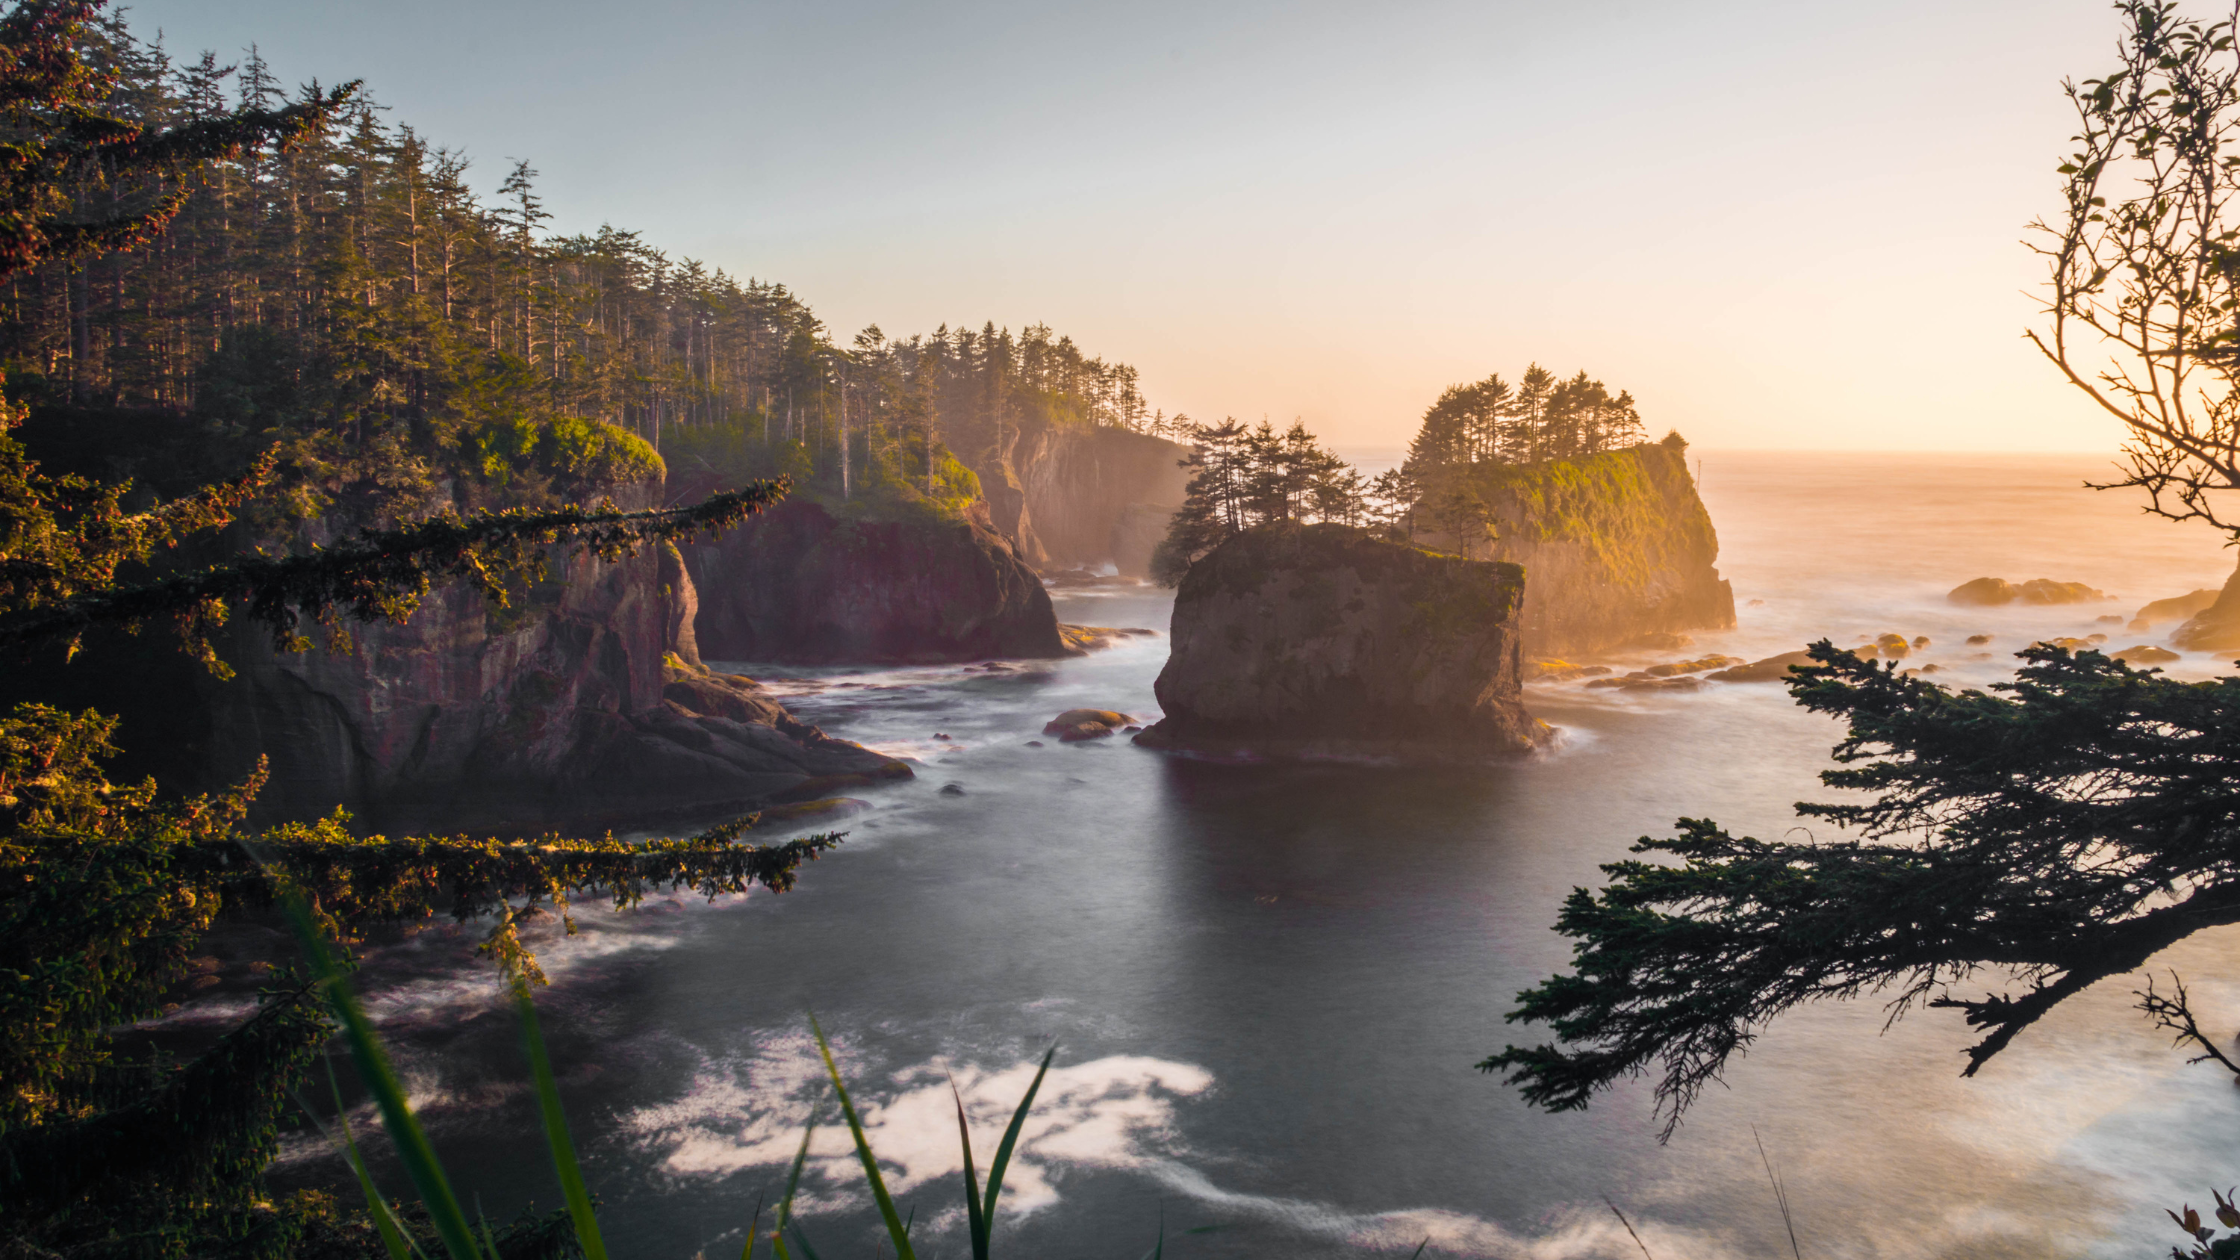 Visiting Western Washington in your RV